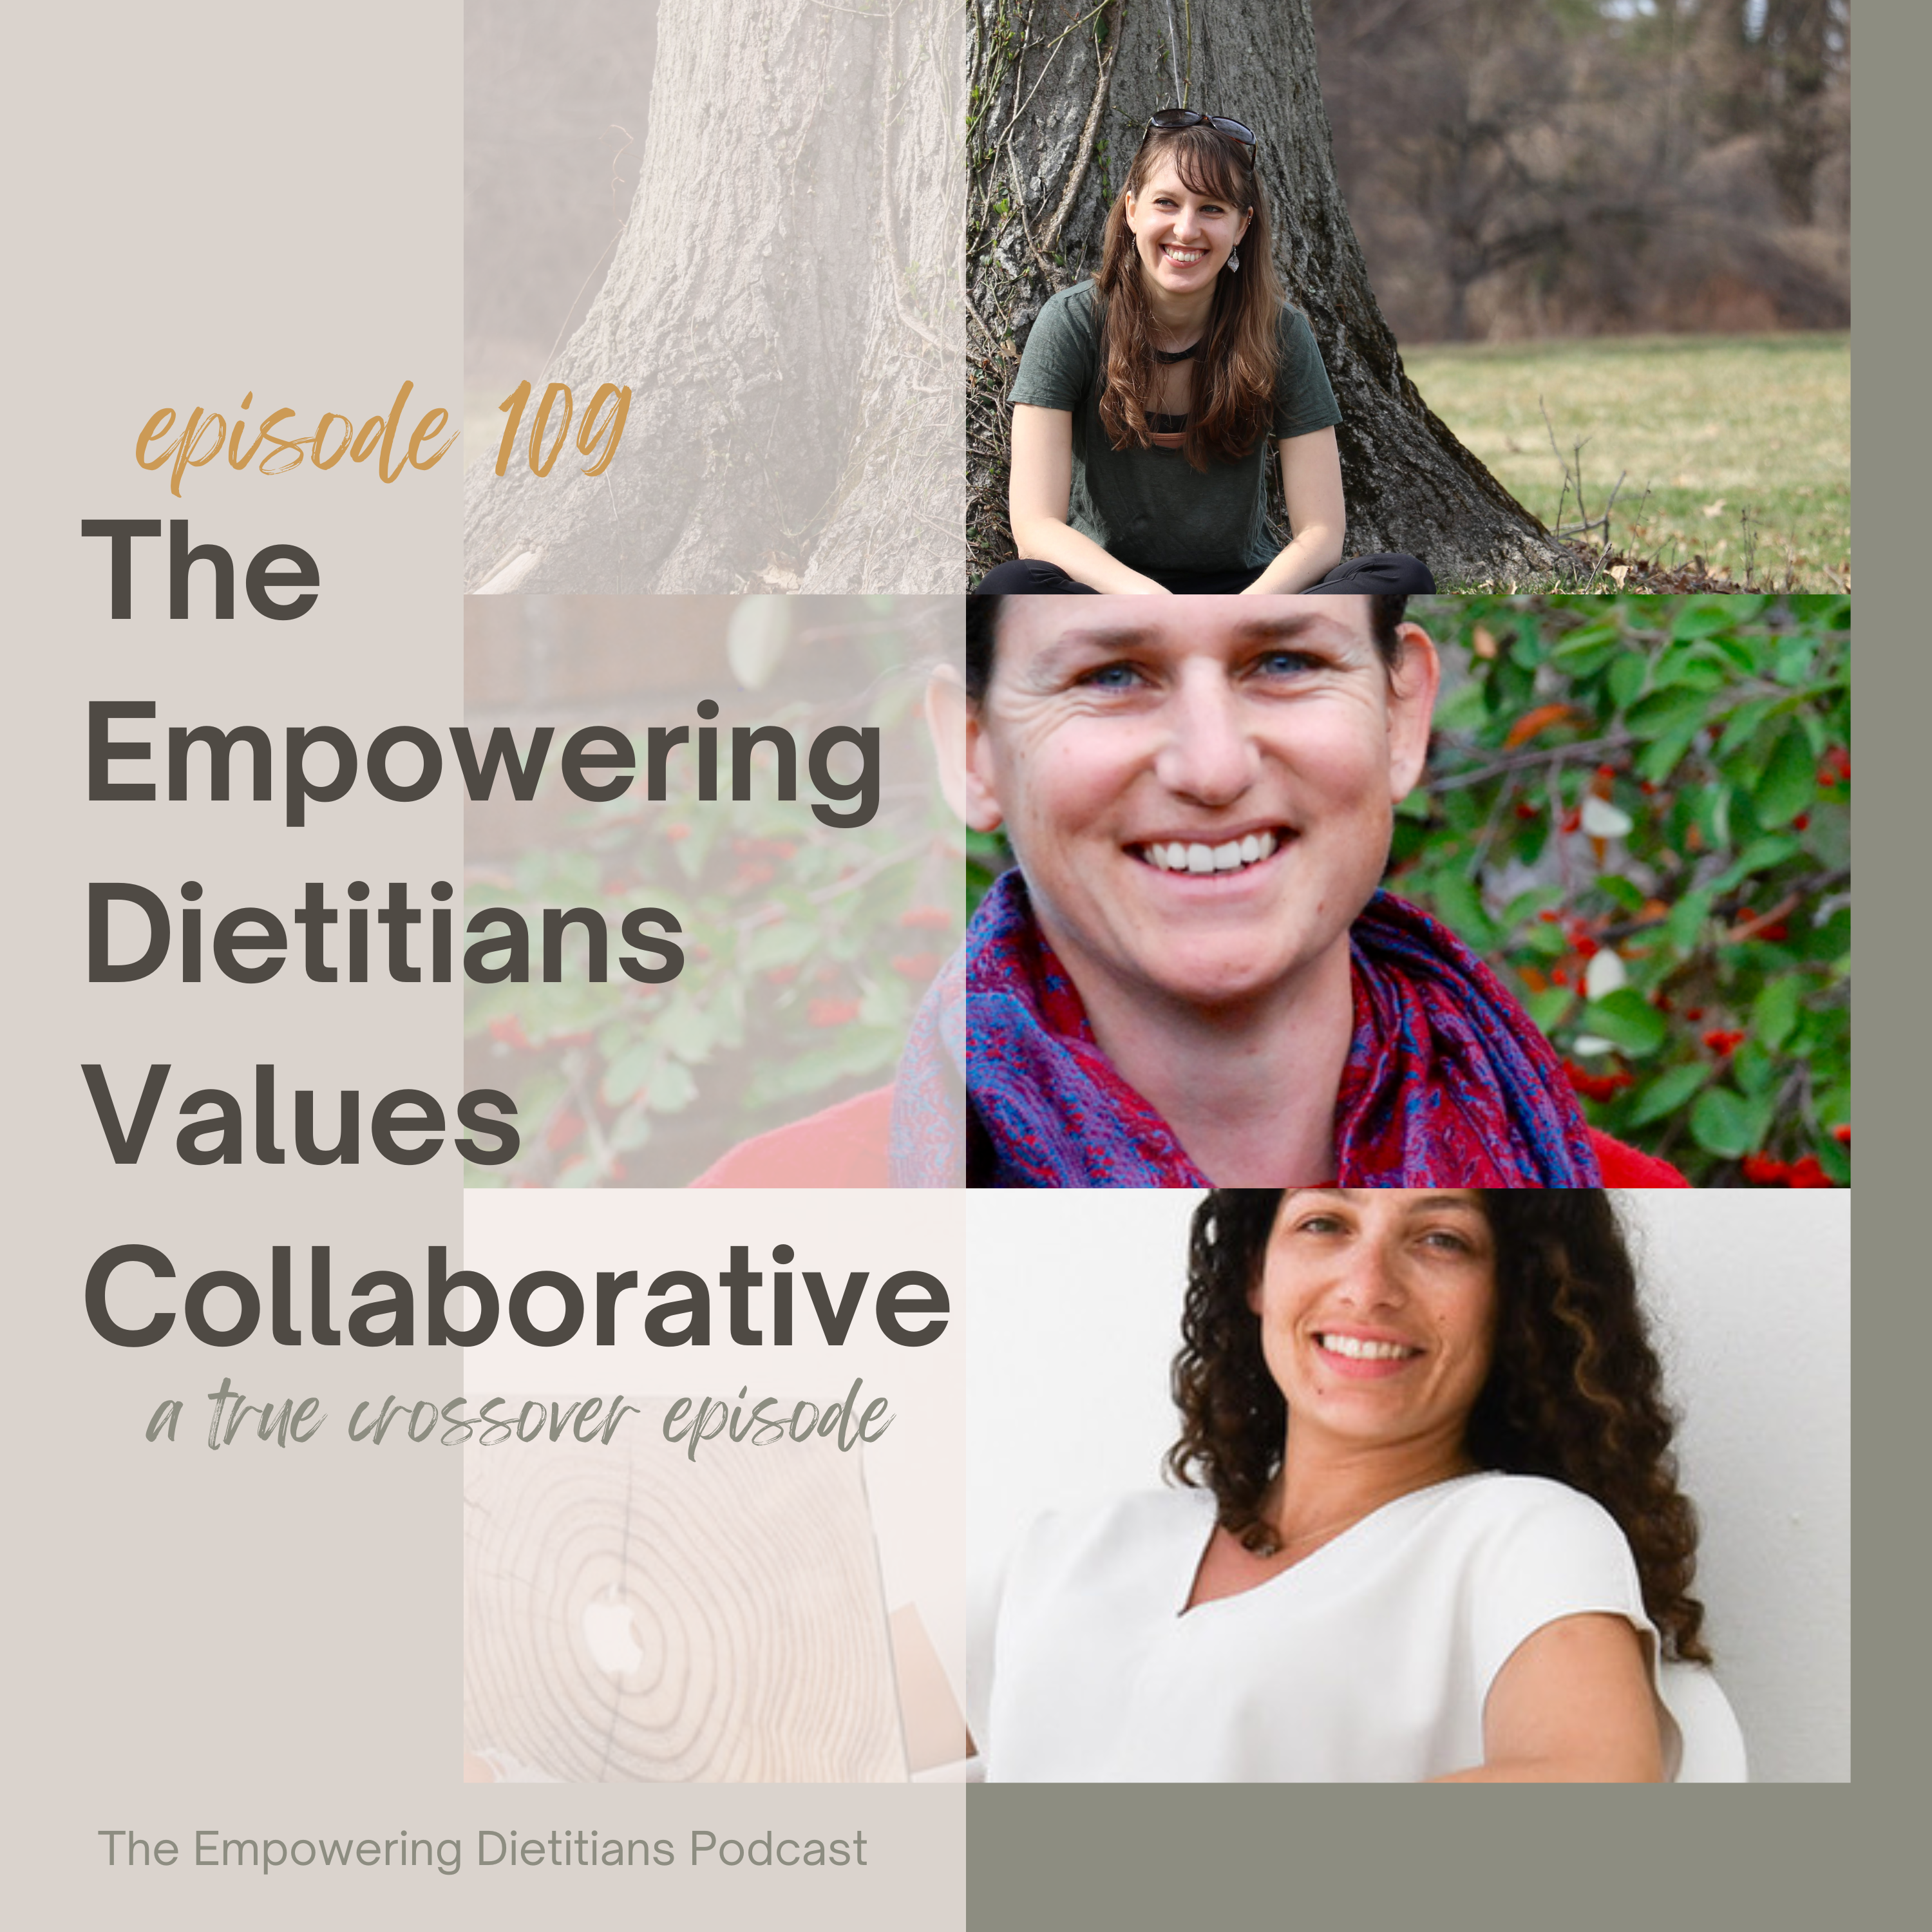 the empowering dietitians values collaborative a true crossover episode